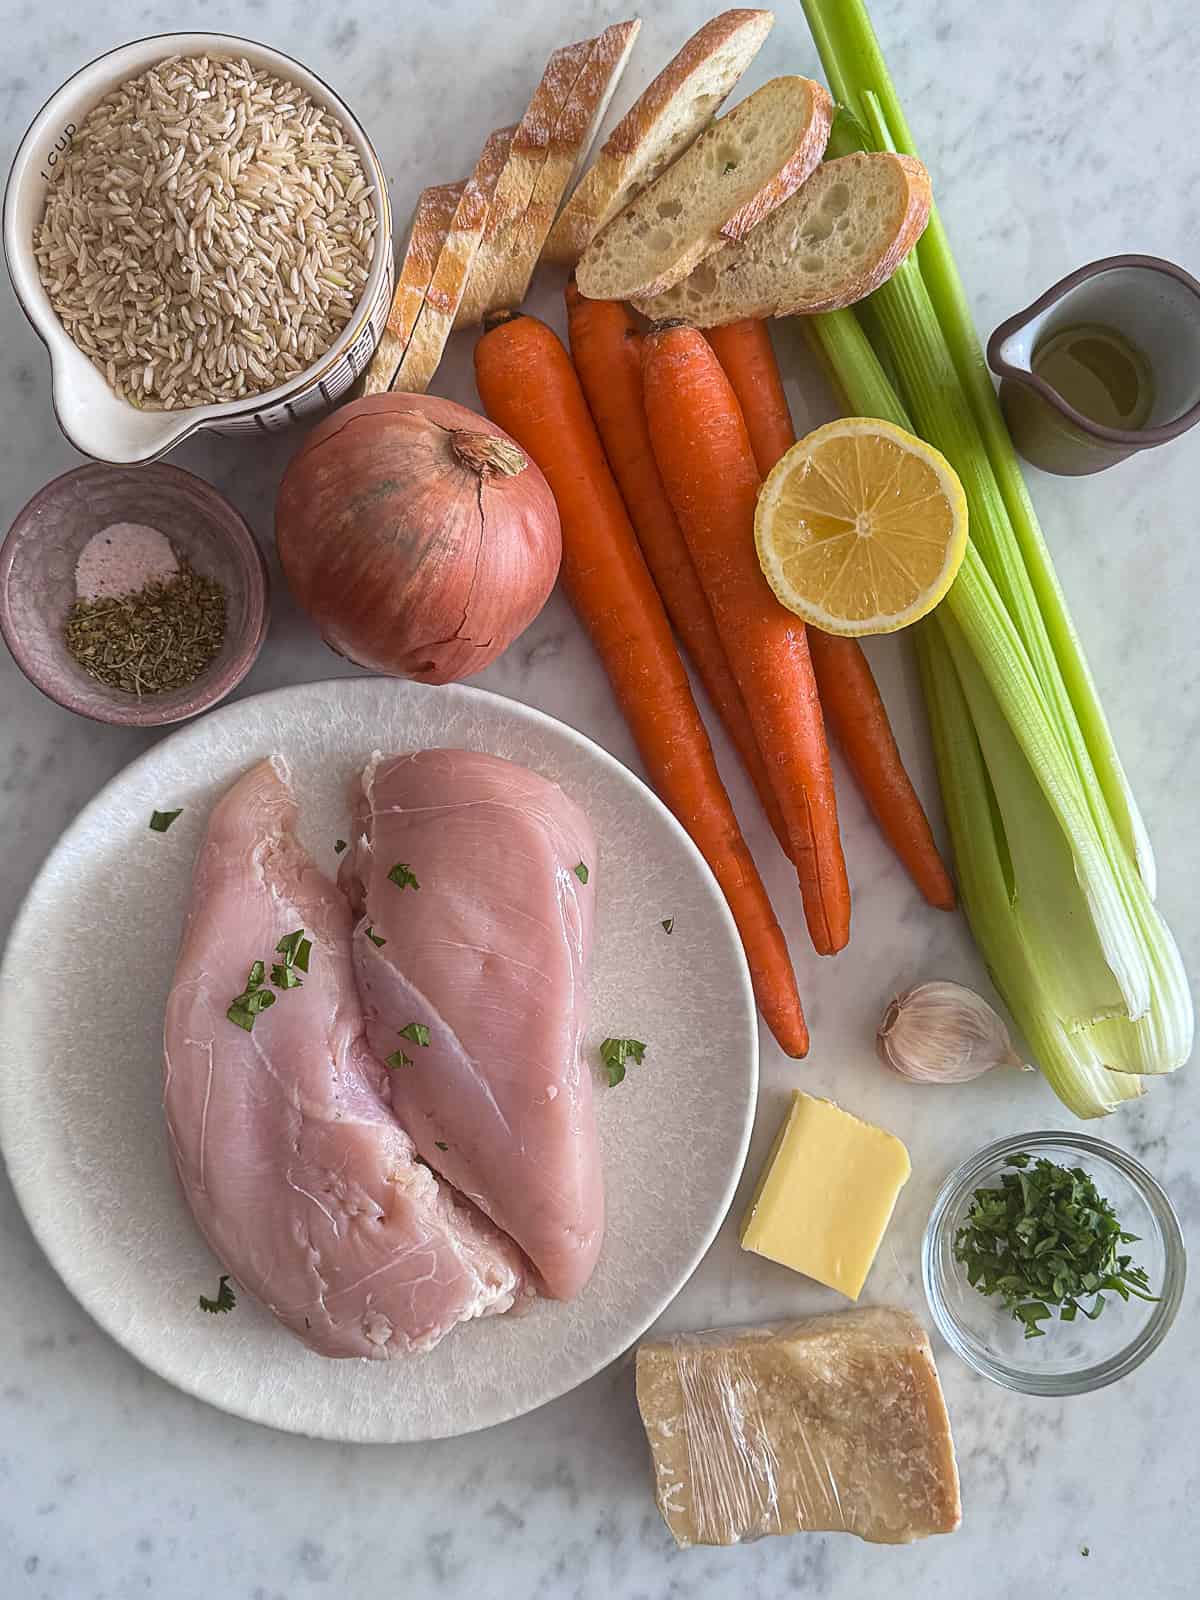 Ingredients prepped for Chicken and Rice Soup